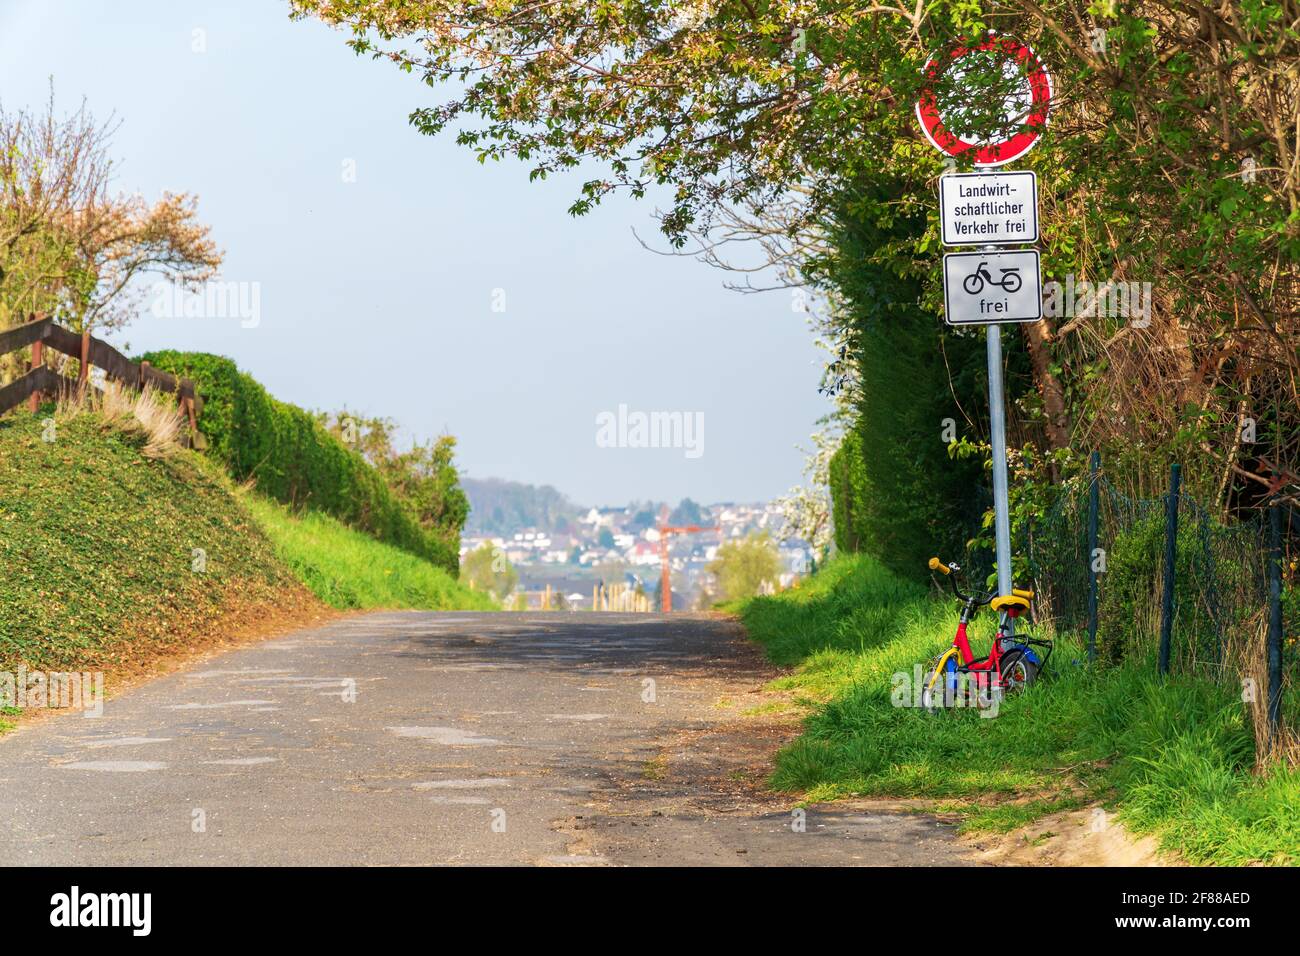 Small child's bicycle parked at a traffic sign with German text that says: 'No through traffic. Agricultural traffic free. Mopeds allowed'. Stock Photo